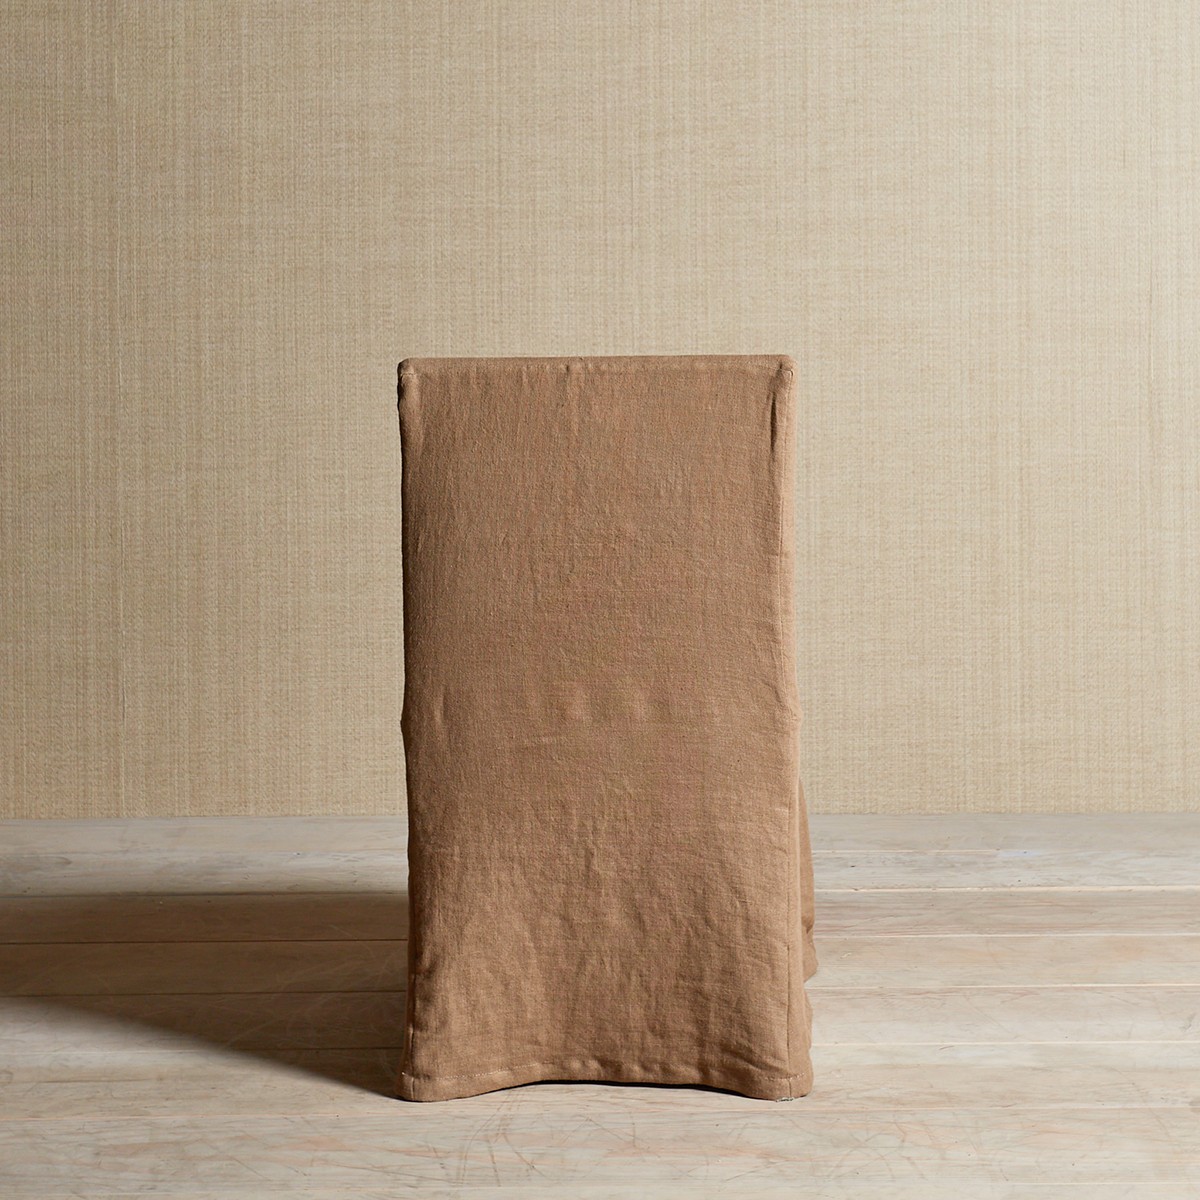 a brown bag sitting on top of a wooden floor